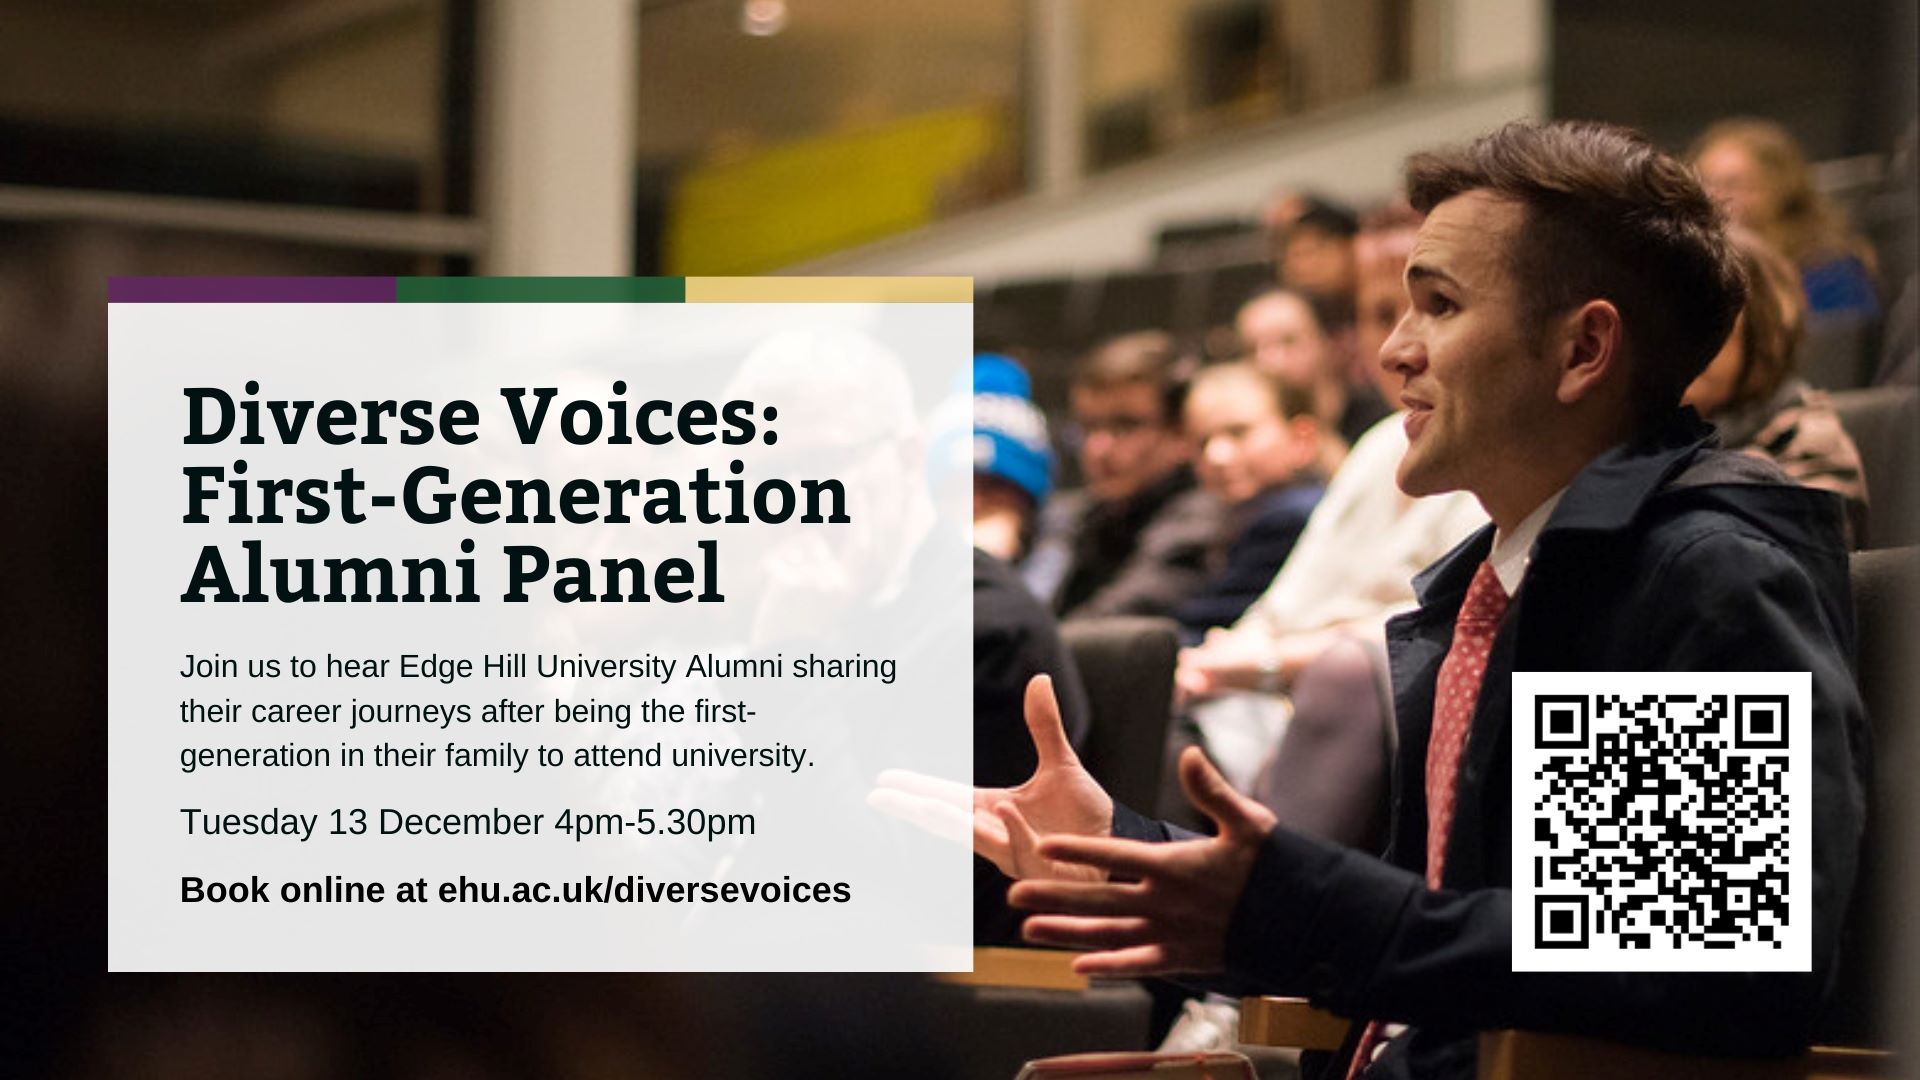 Diverse Voices: First-Generation Alumni Panel - Join us to hear Edge Hill University Alumni sharing their career journeys after being the first- generation in their family to attend university. Tuesday 13th December 4pm till 5.30pm Book online at ehu.ac.uk/diversevoices